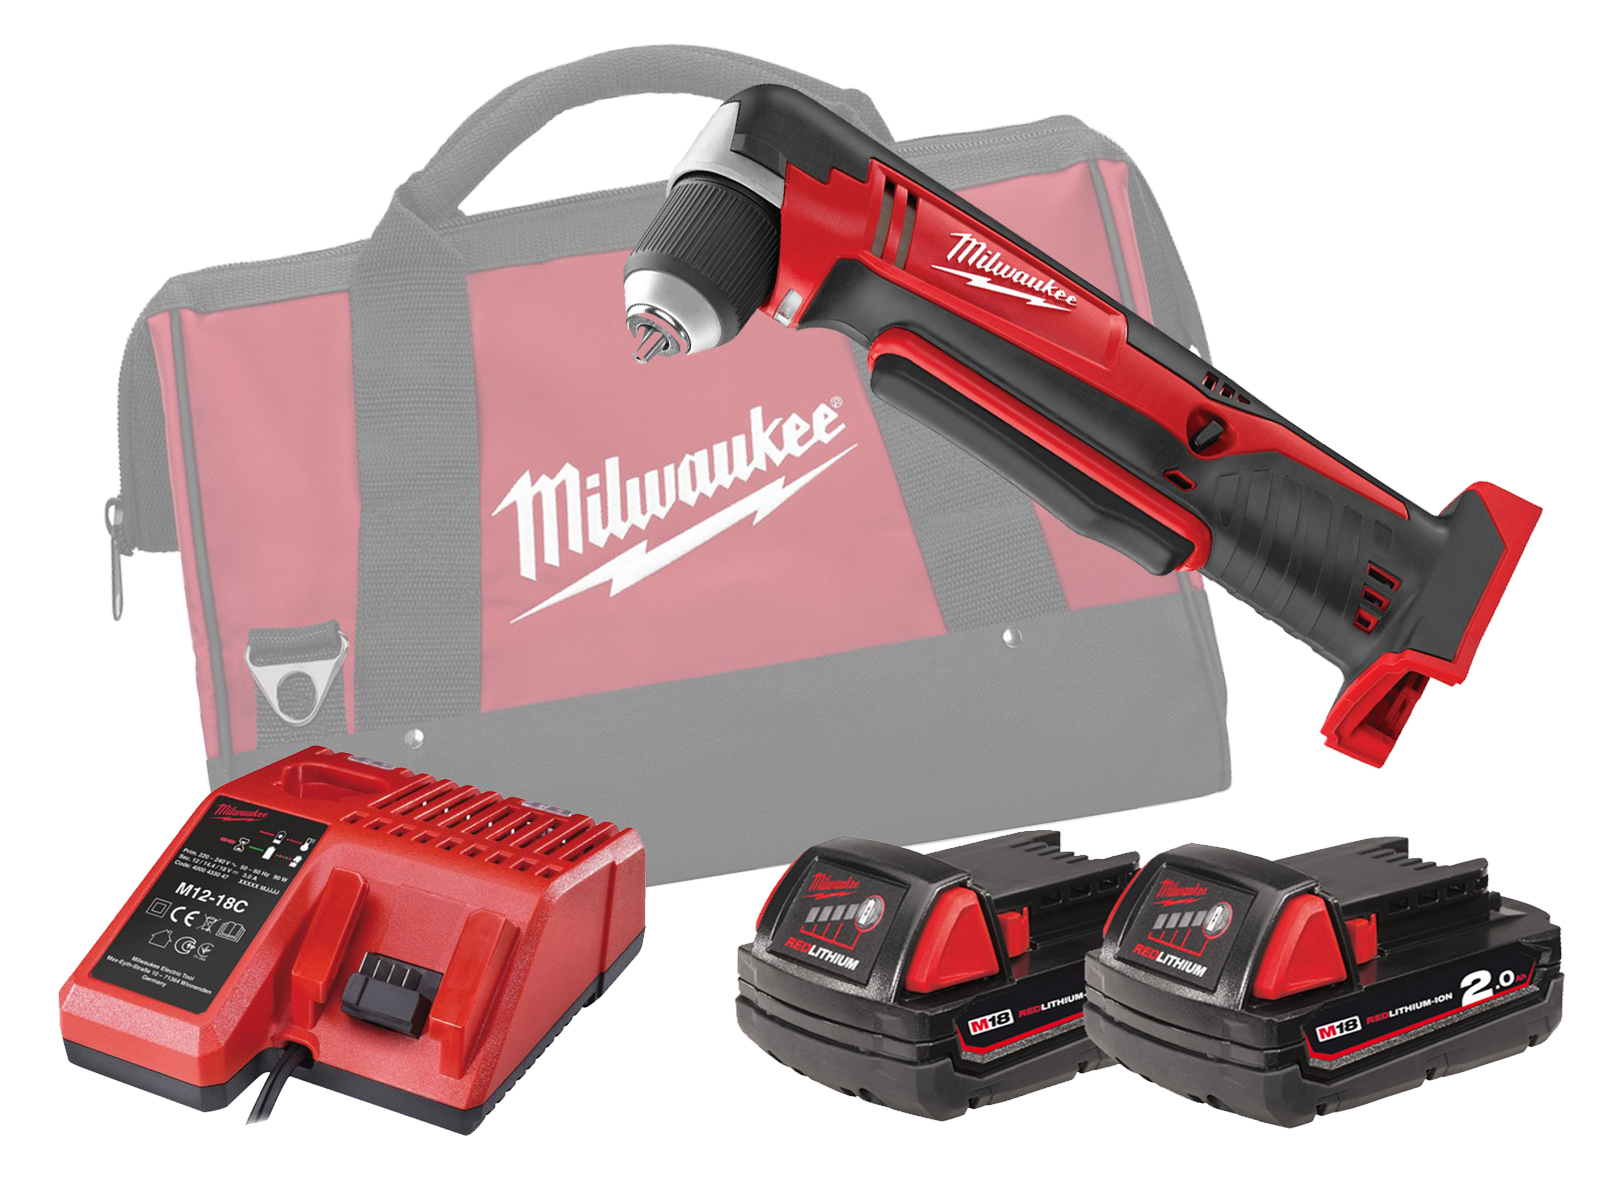 Milwaukee 18V Compact Right Angle Drill - C18RAD - 2.0Ah Pack